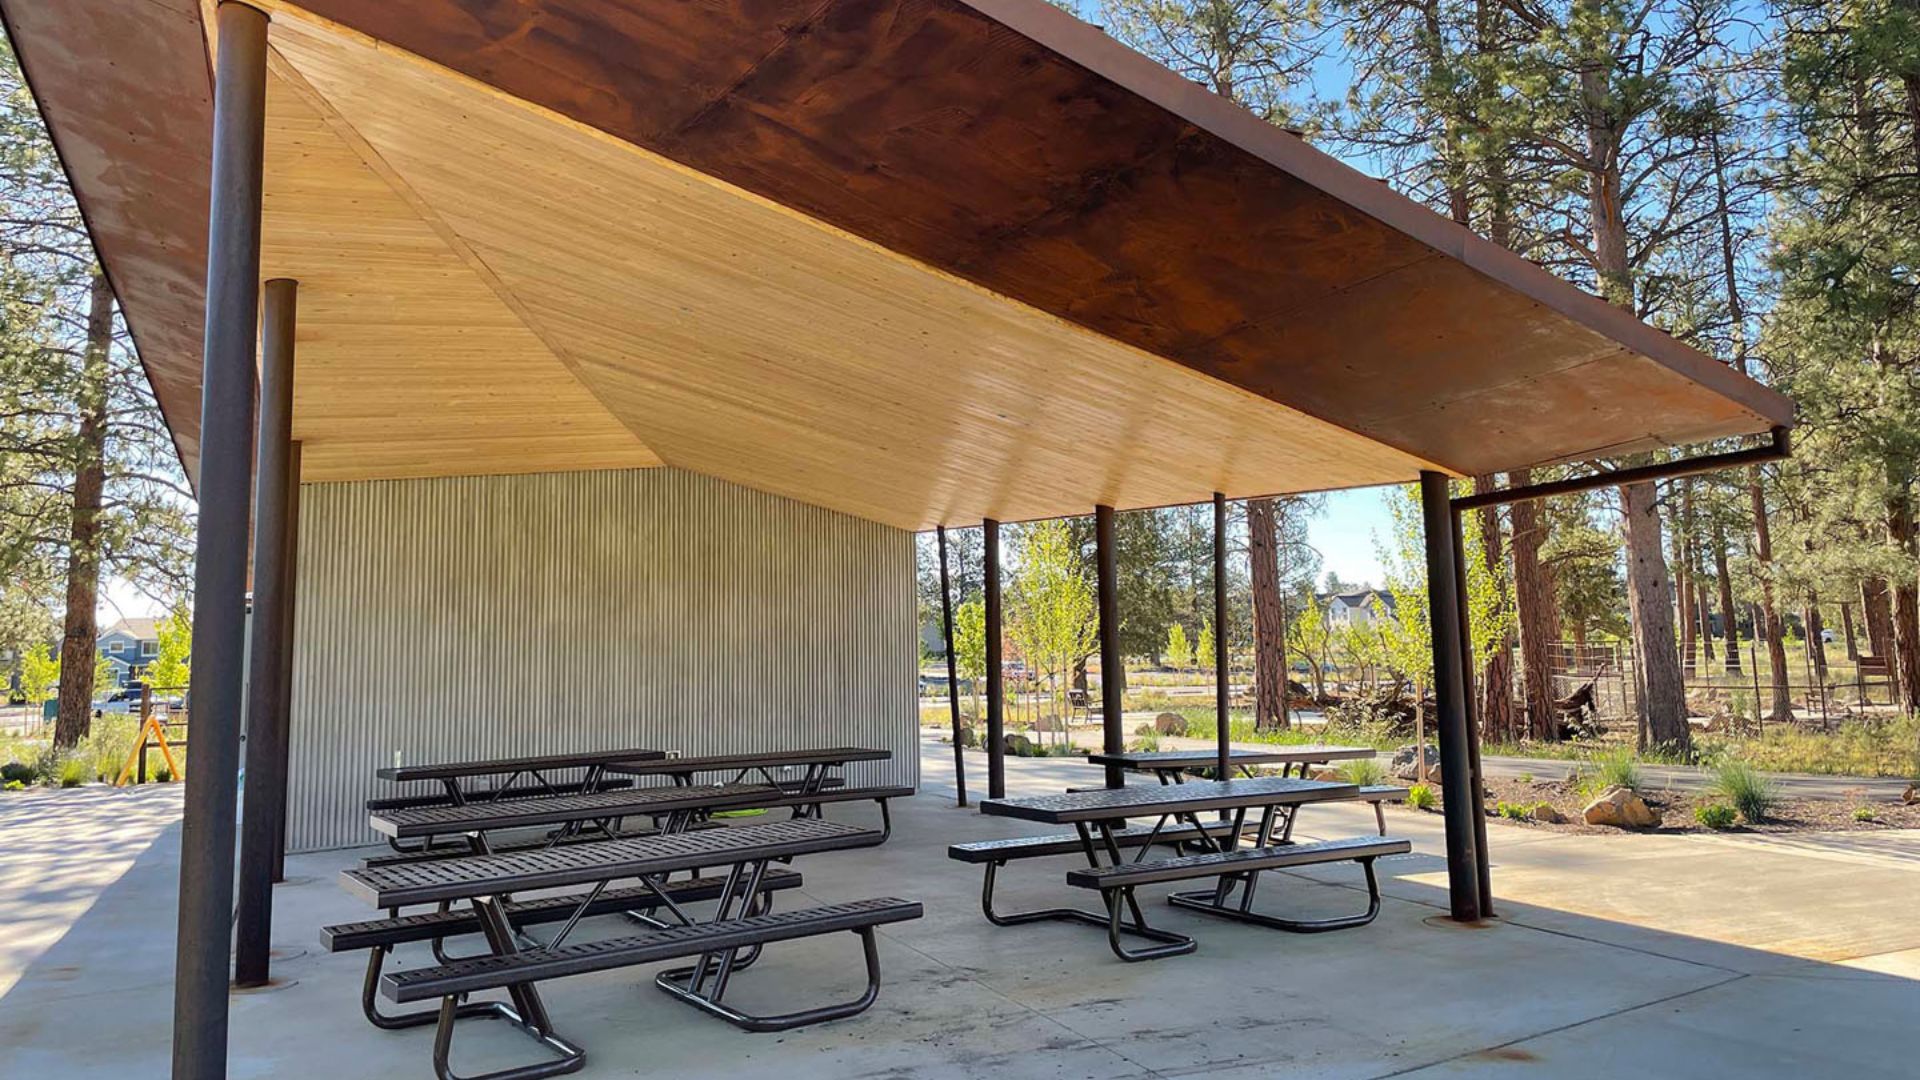 the picnic shelter at alpenglow park